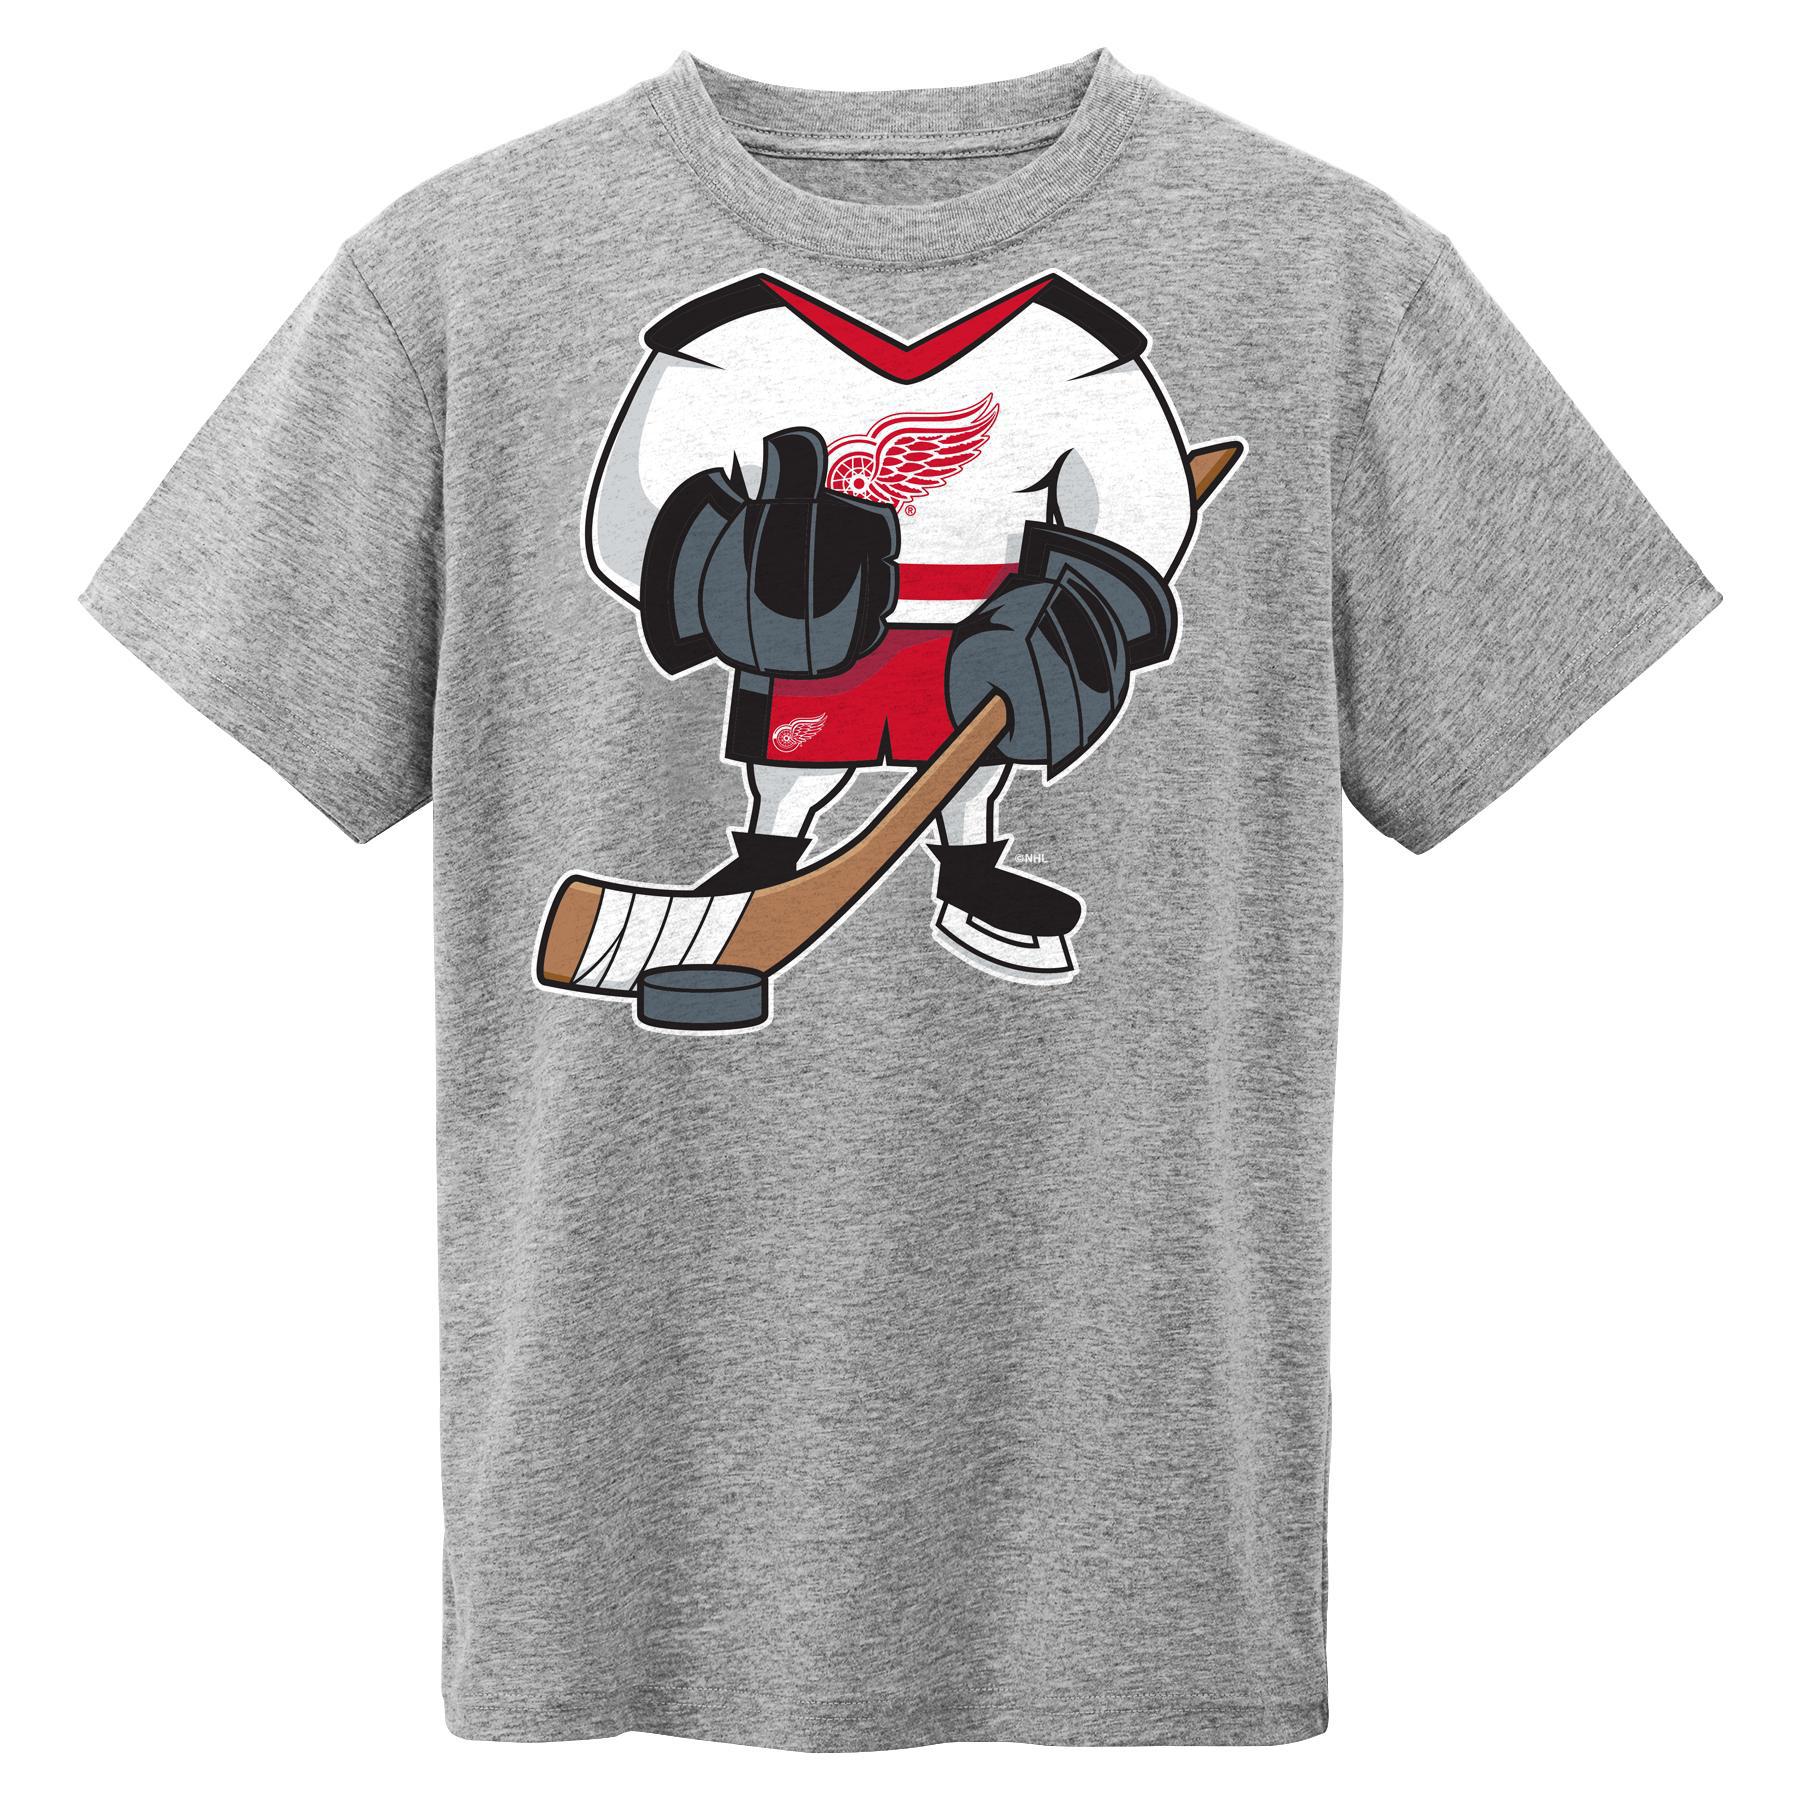 NHL Toddler Boys' Graphic T-Shirt - Detroit Red Wings